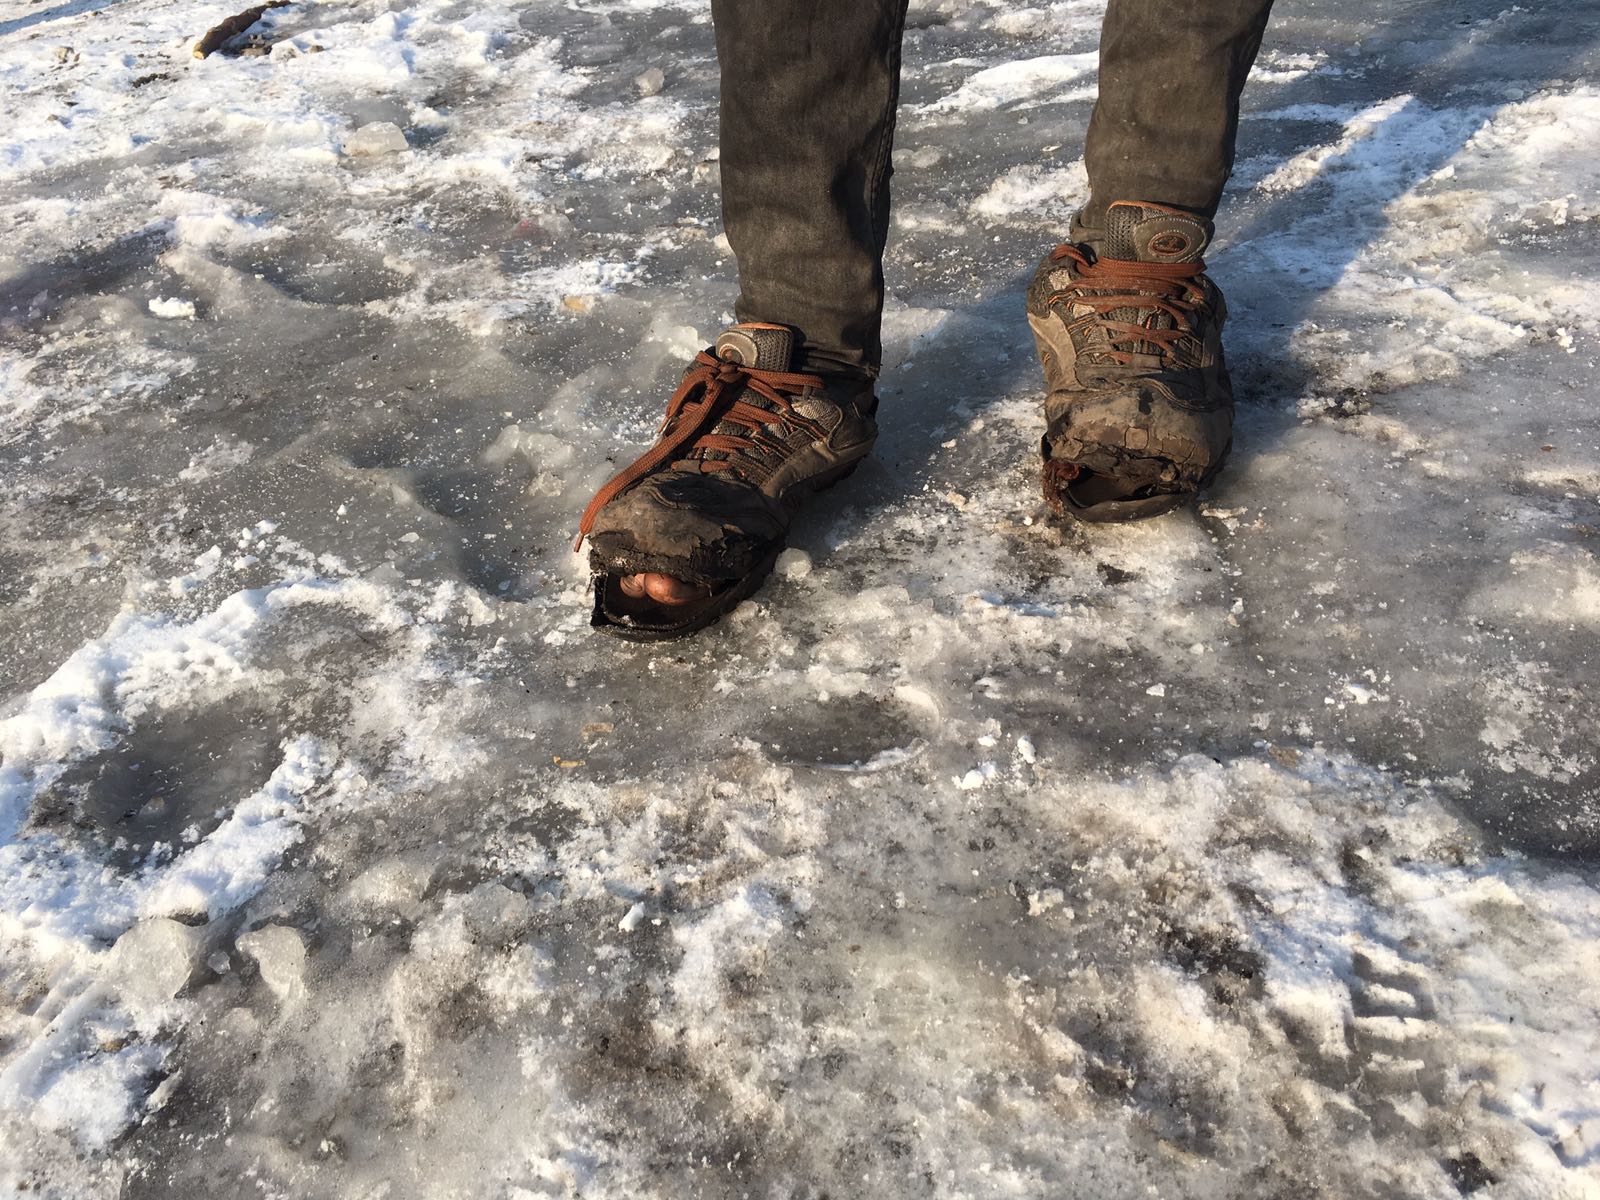 A homeless refugee in Belgrade is pictured with their toes poking out of their tattered footwear in freezing conditions